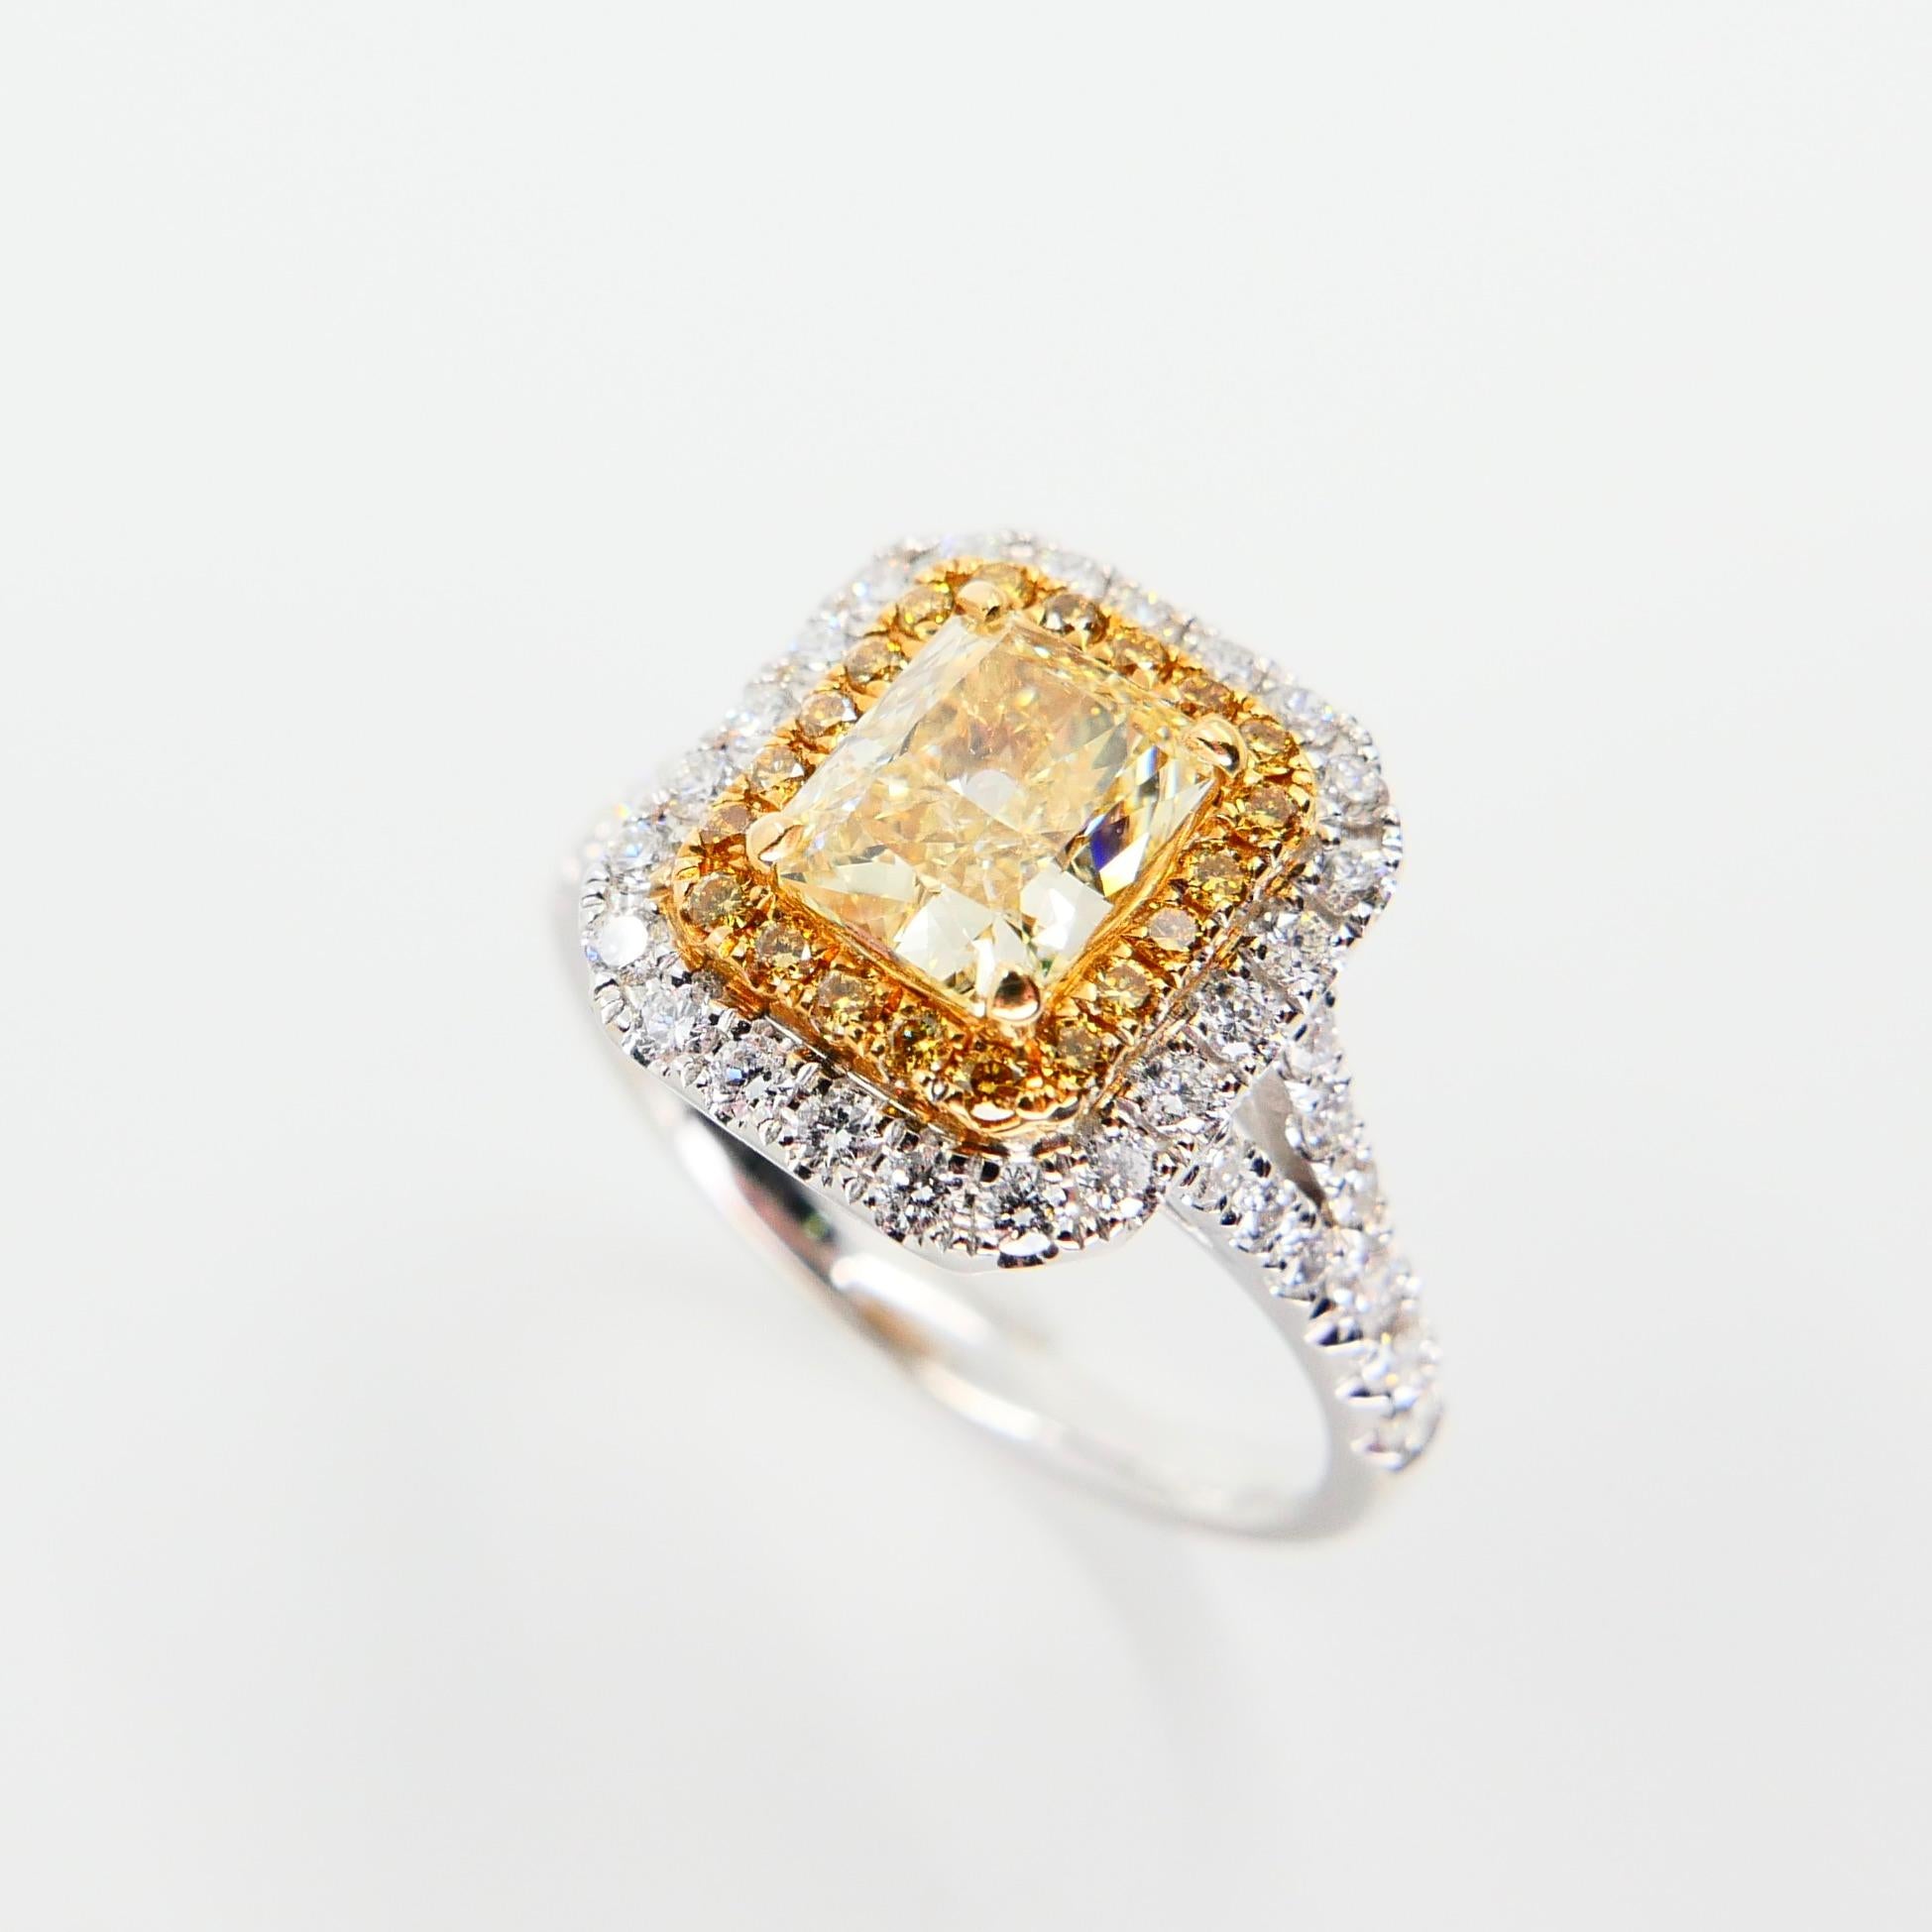 GIA Certified 1.06 Carat Cape Yellow Diamond Cocktail Ring, Double Halo Setting For Sale 4